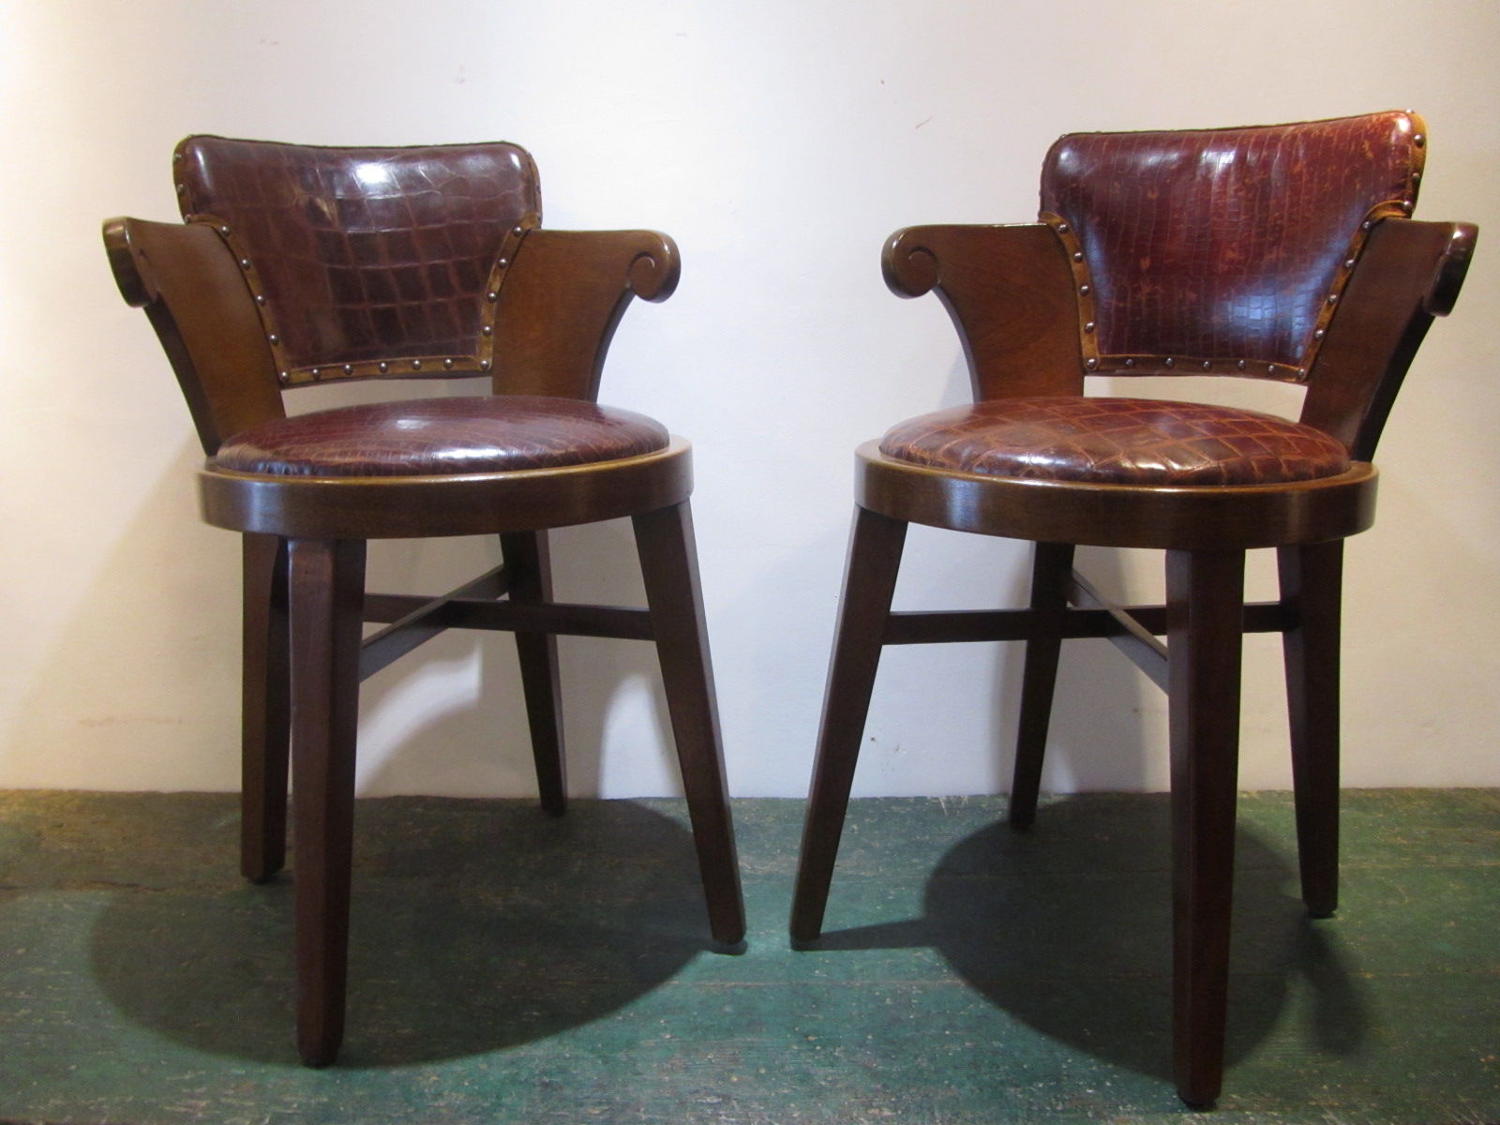 A set of two bridge chairs